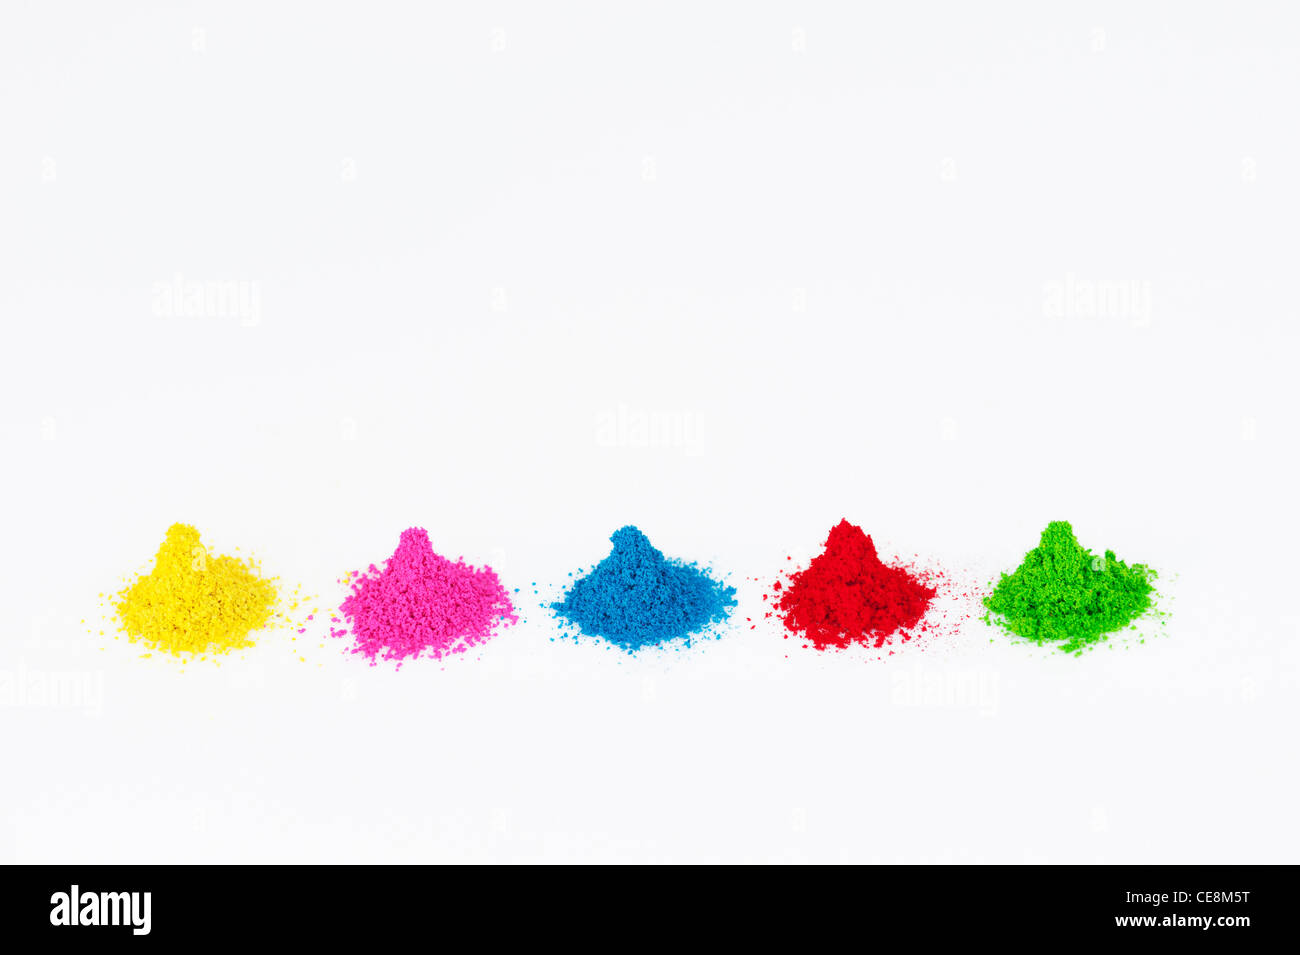 Piles of coloured Indian powder used for making rangoli designs. White Background Stock Photo